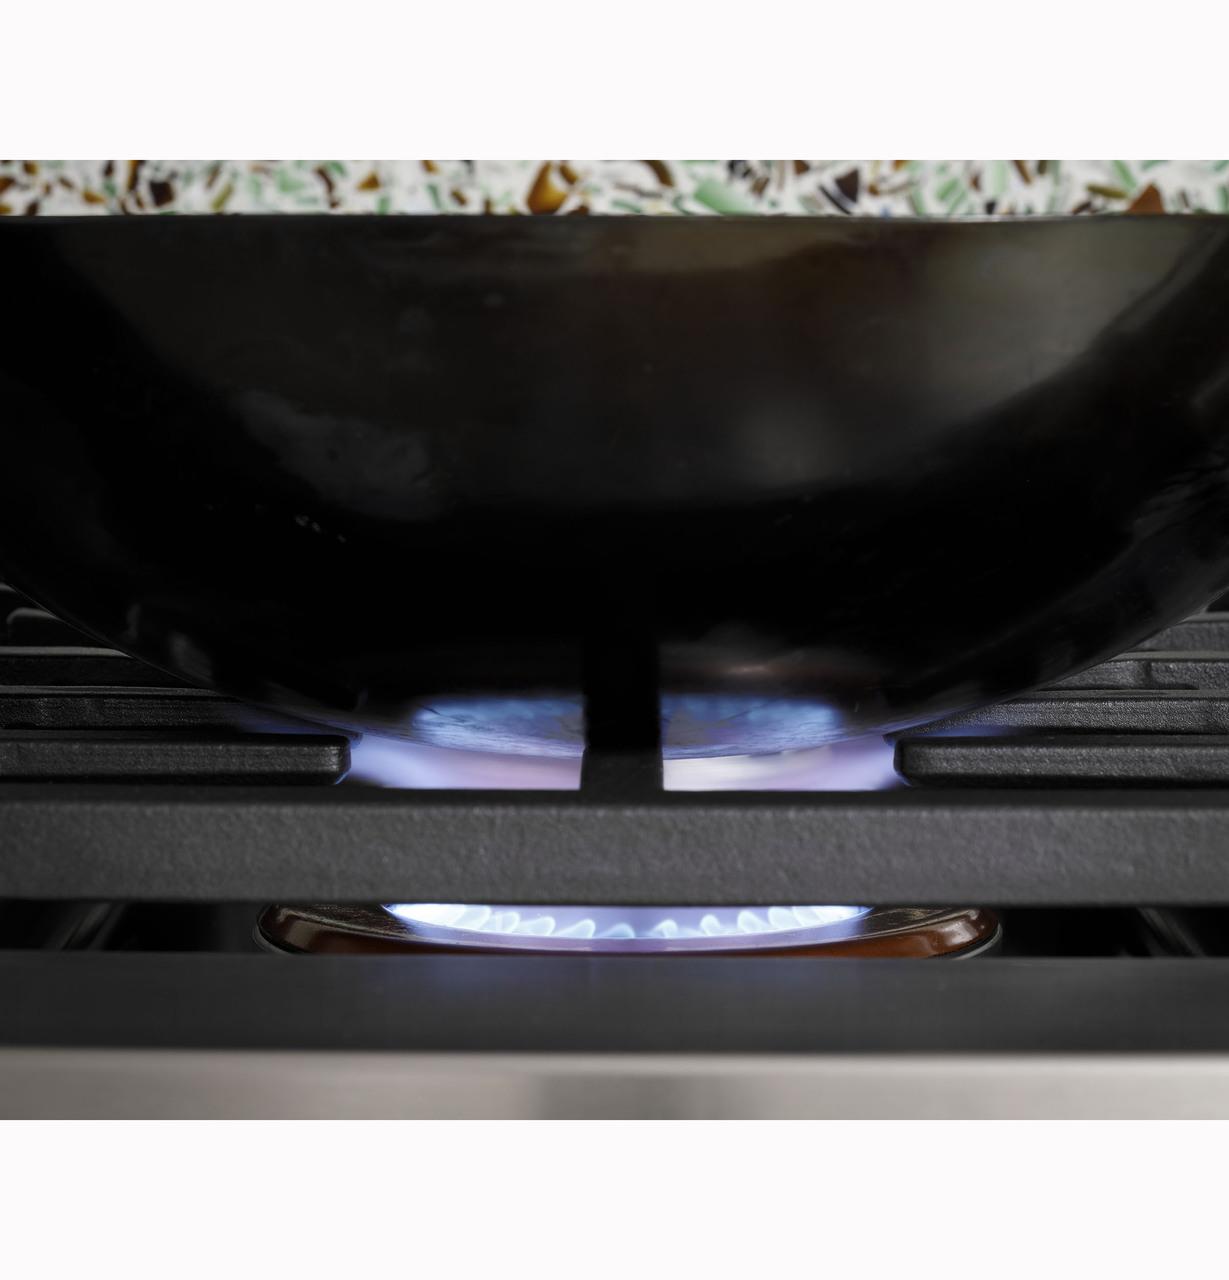 Cafe Caf(eback)™ 48" Commercial-Style Gas Rangetop with 6 Burners and Integrated Griddle (Natural Gas)